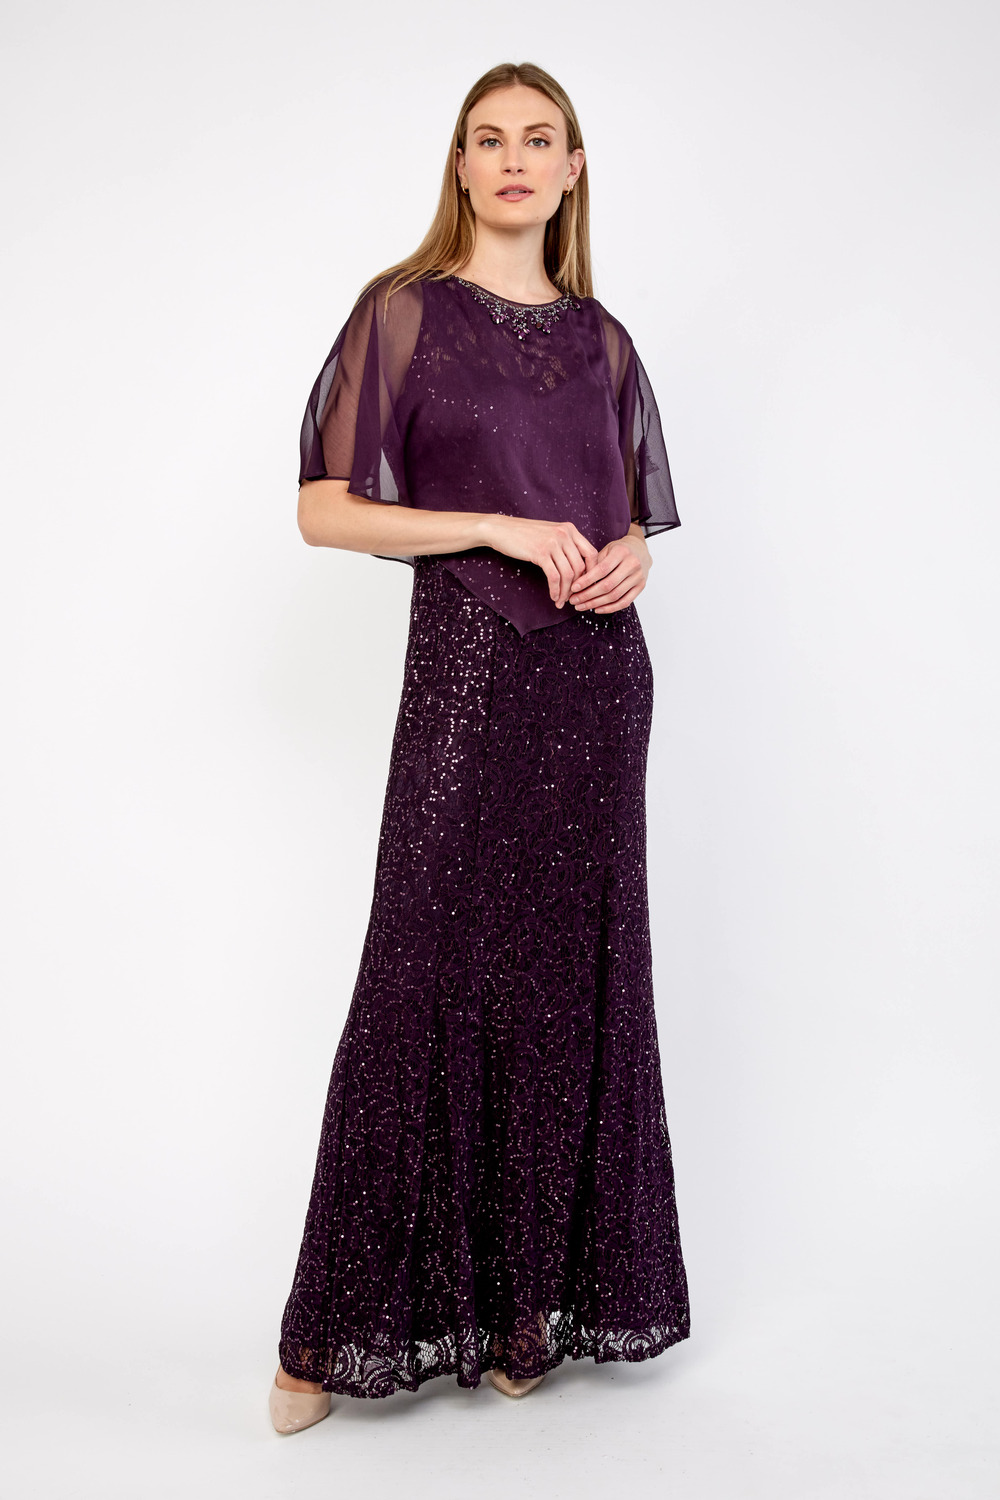 Fit & Flare Gown with Chiffon Capelet Style 81122444. New Plum